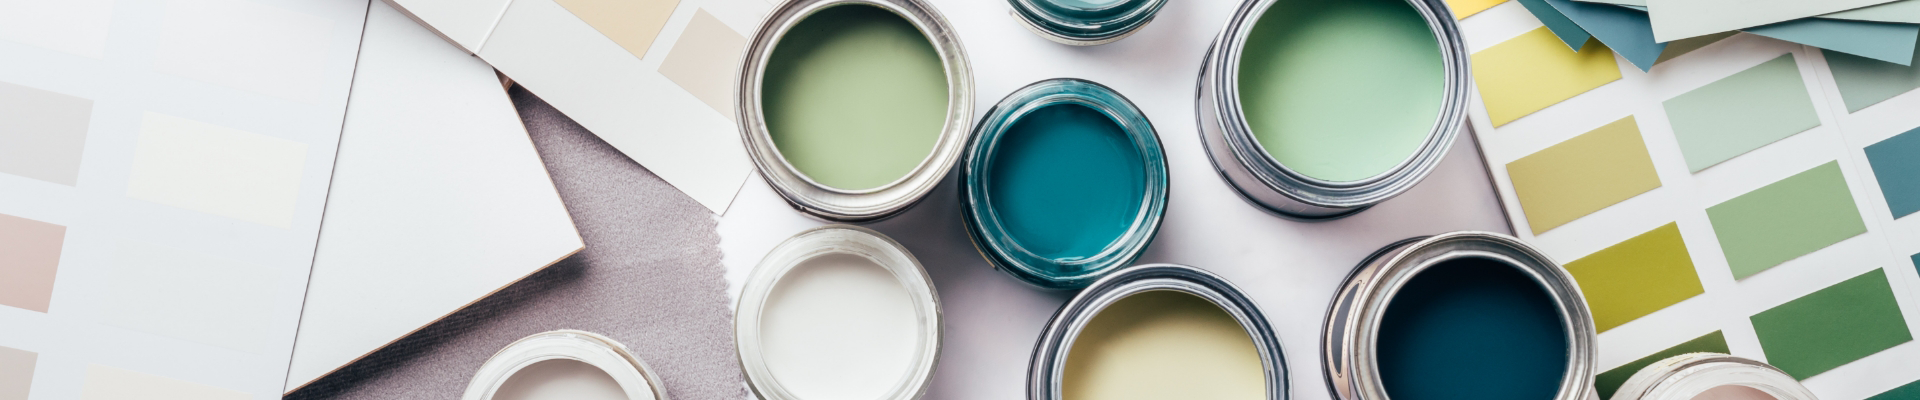 Green, blue, and yellow paint swatches and paint samples